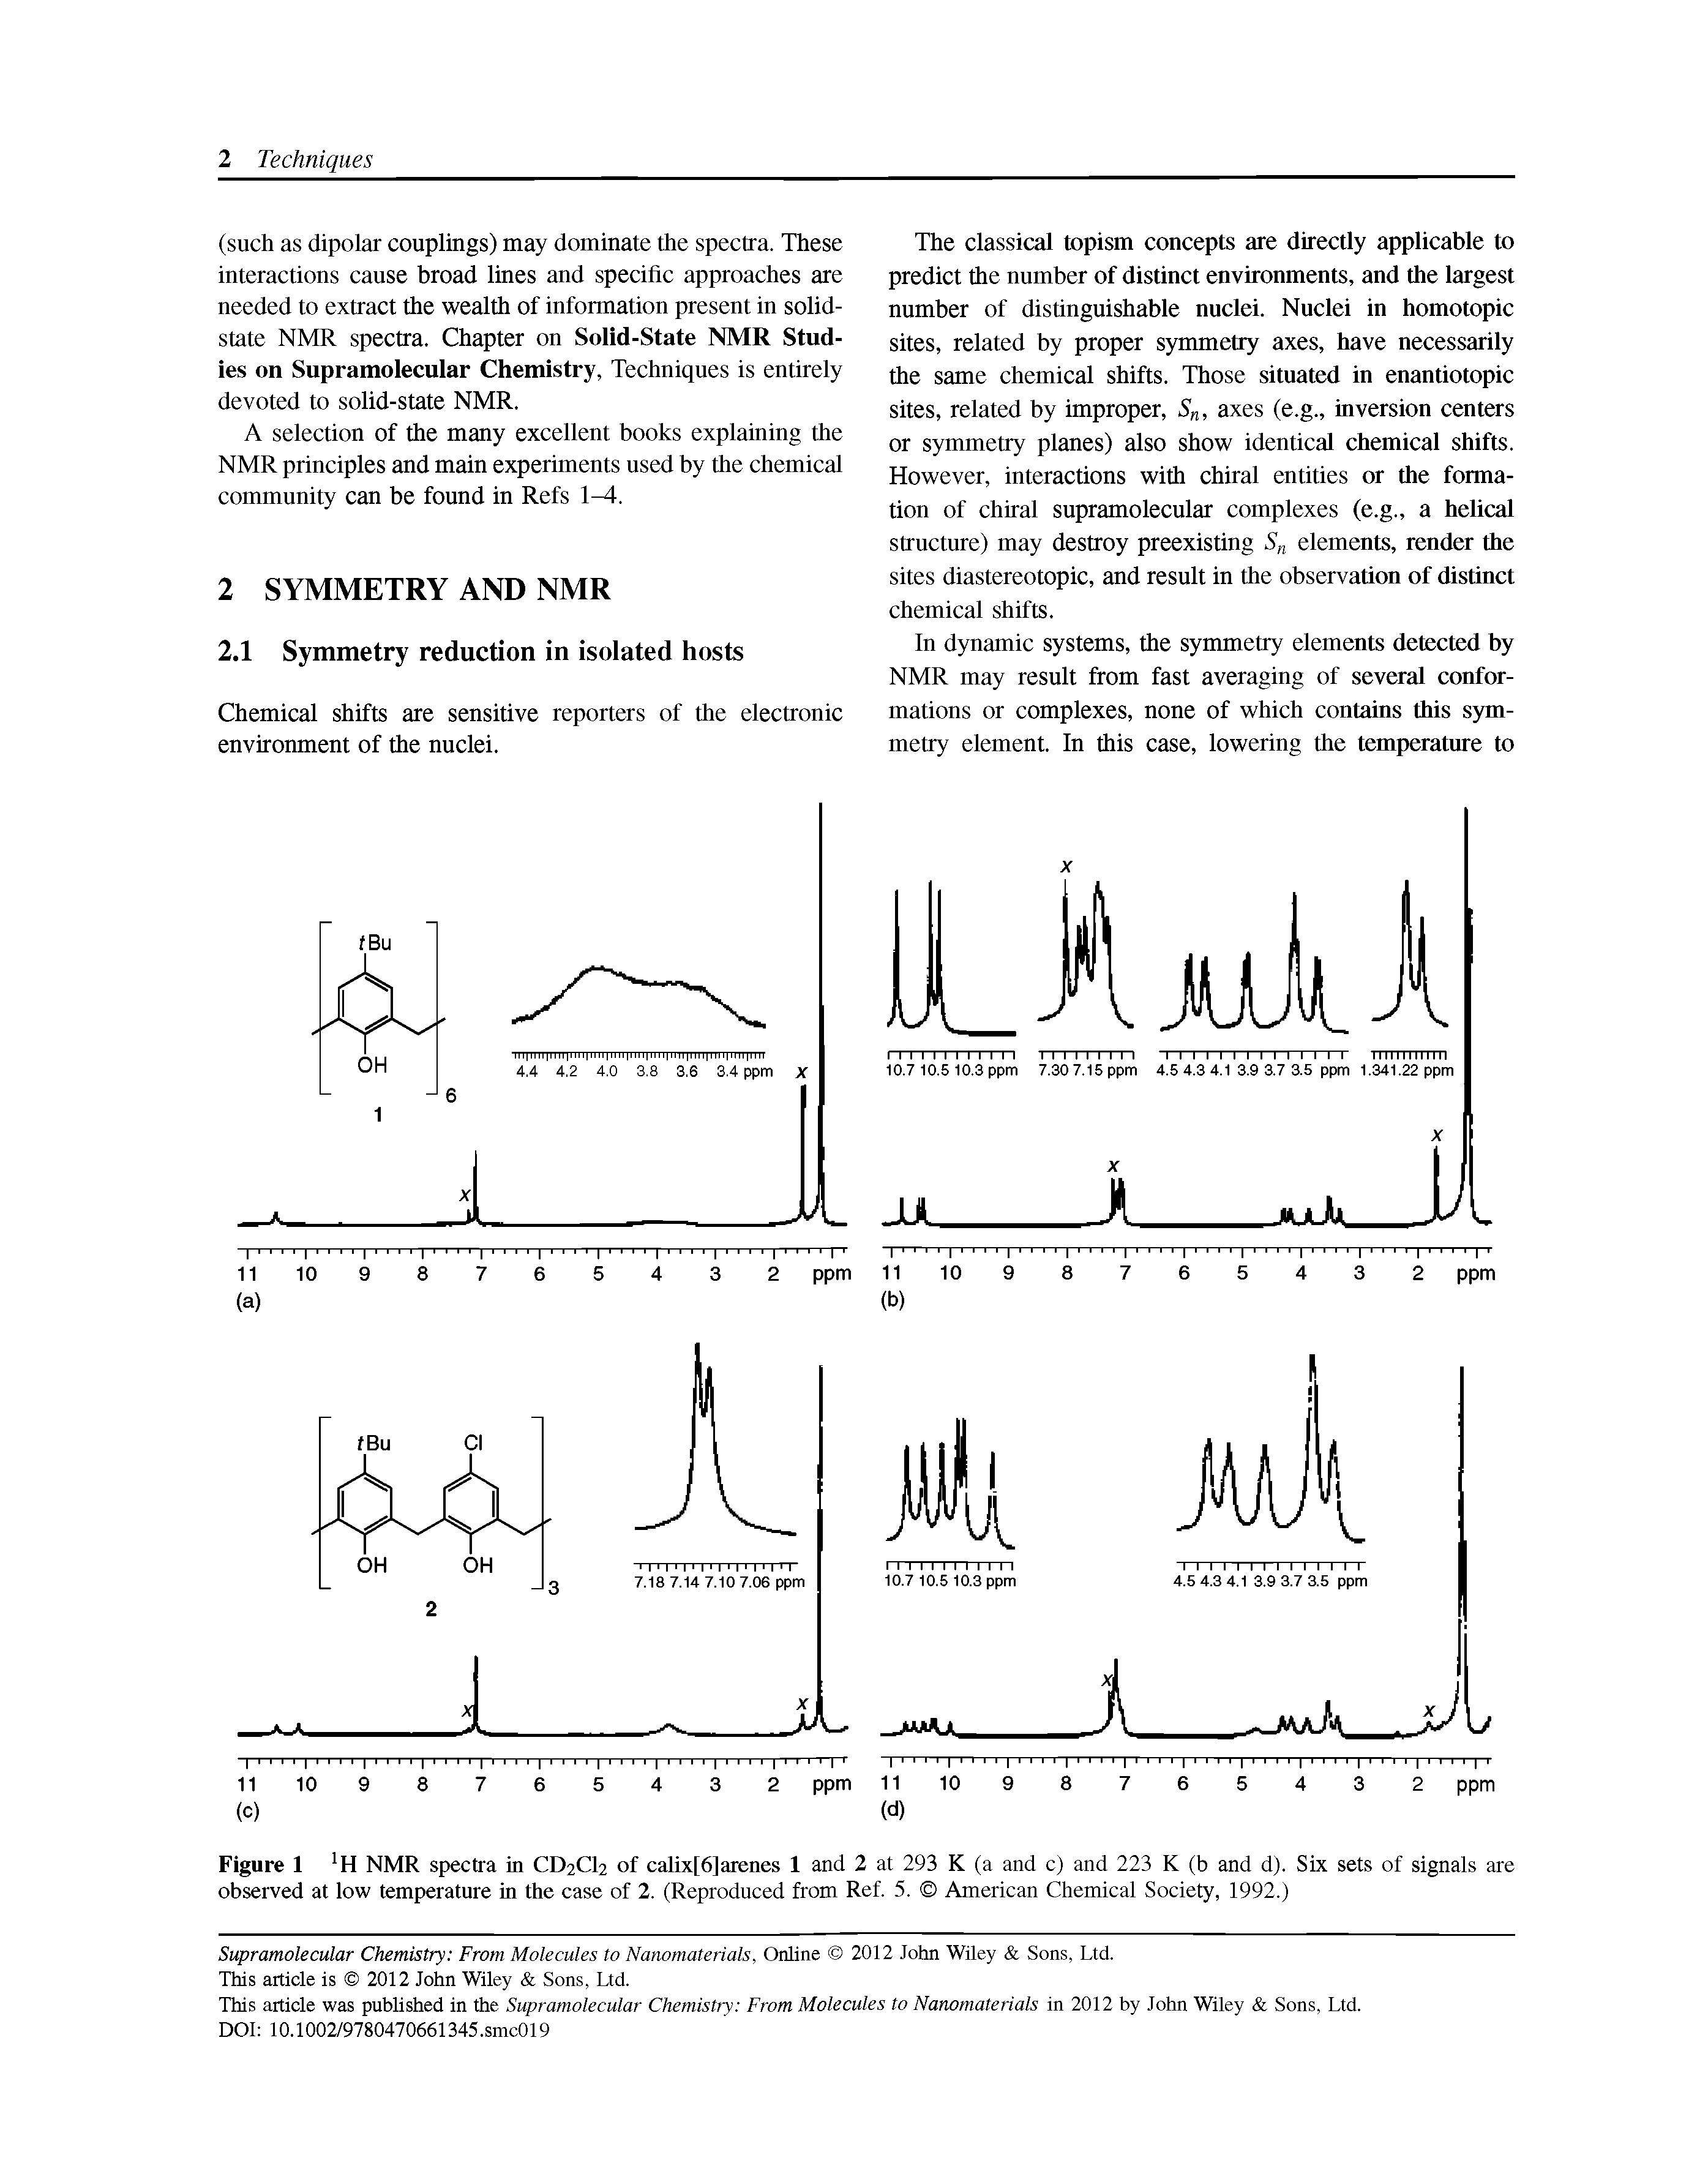 Figure 1 H NMR spectra in CD2CI2 of caUx[6]arenes 1 and 2 at 293 K (a and c) and 223 K (b and d). Six sets of signals are observed at low temperature in the case of 2. (Reproduced from Ref. 5. American Chemical Society, 1992.)...